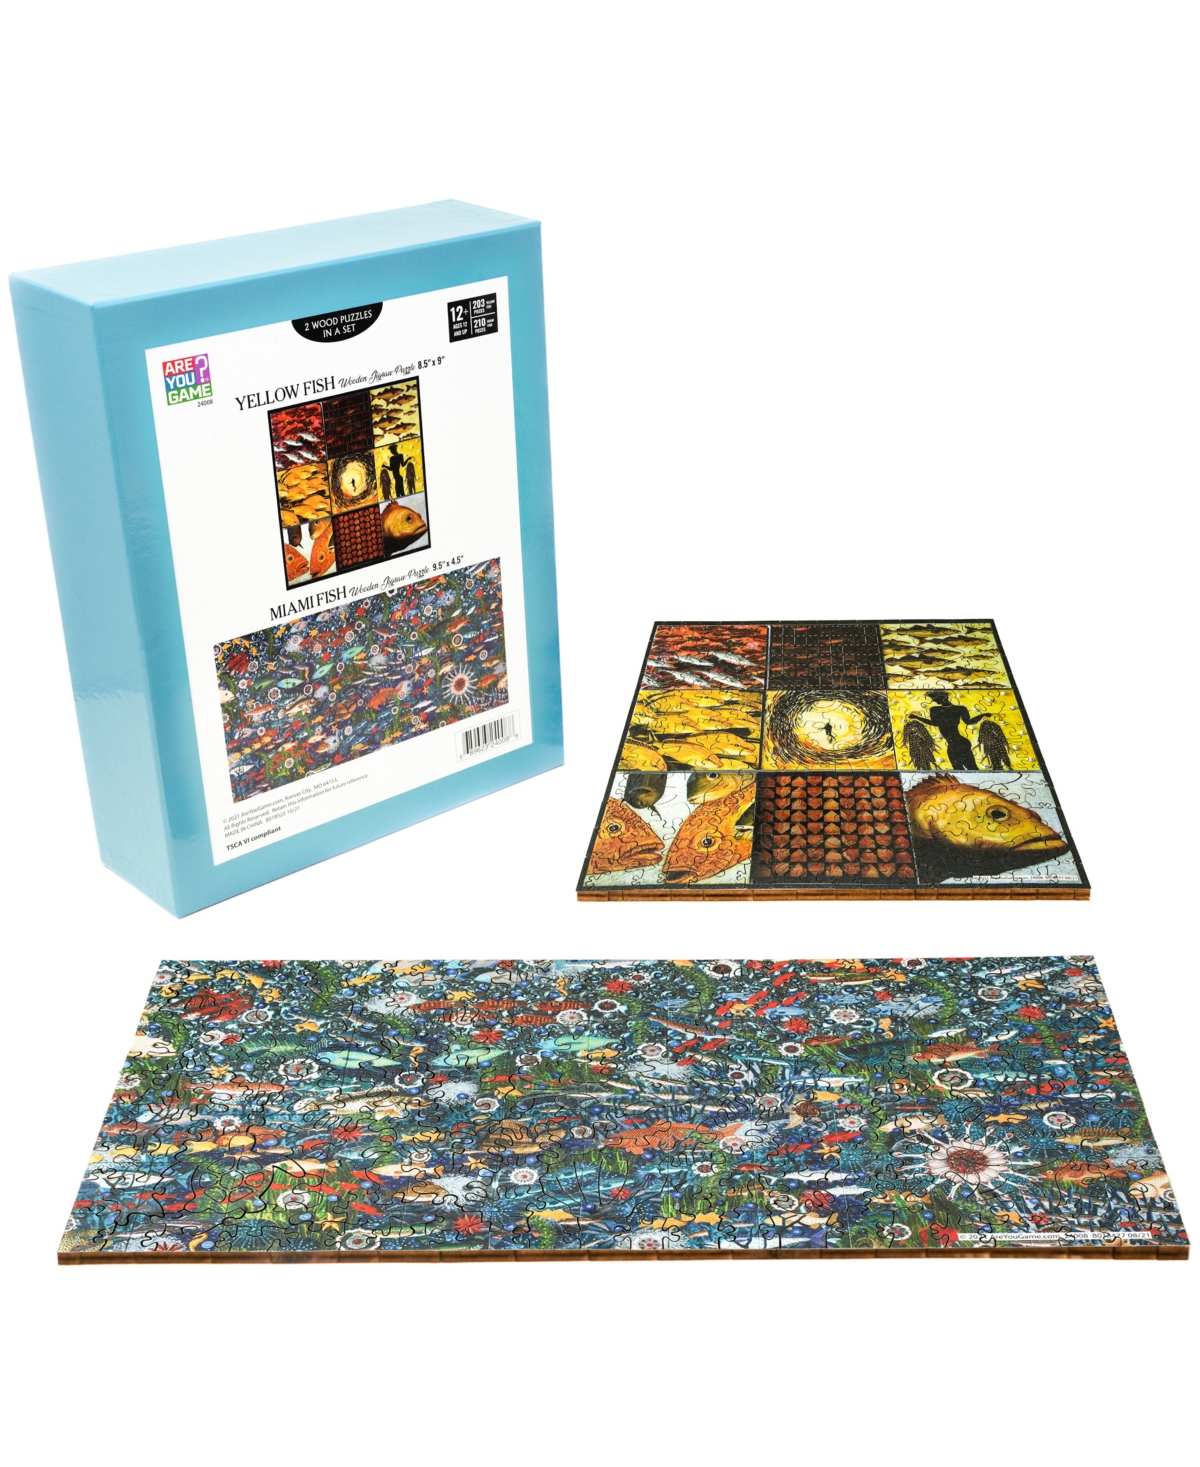 University Games Kids' Areyougame.com Wooden Jigsaw Puzzle Set Miami Fish, 413 Pieces In No Color